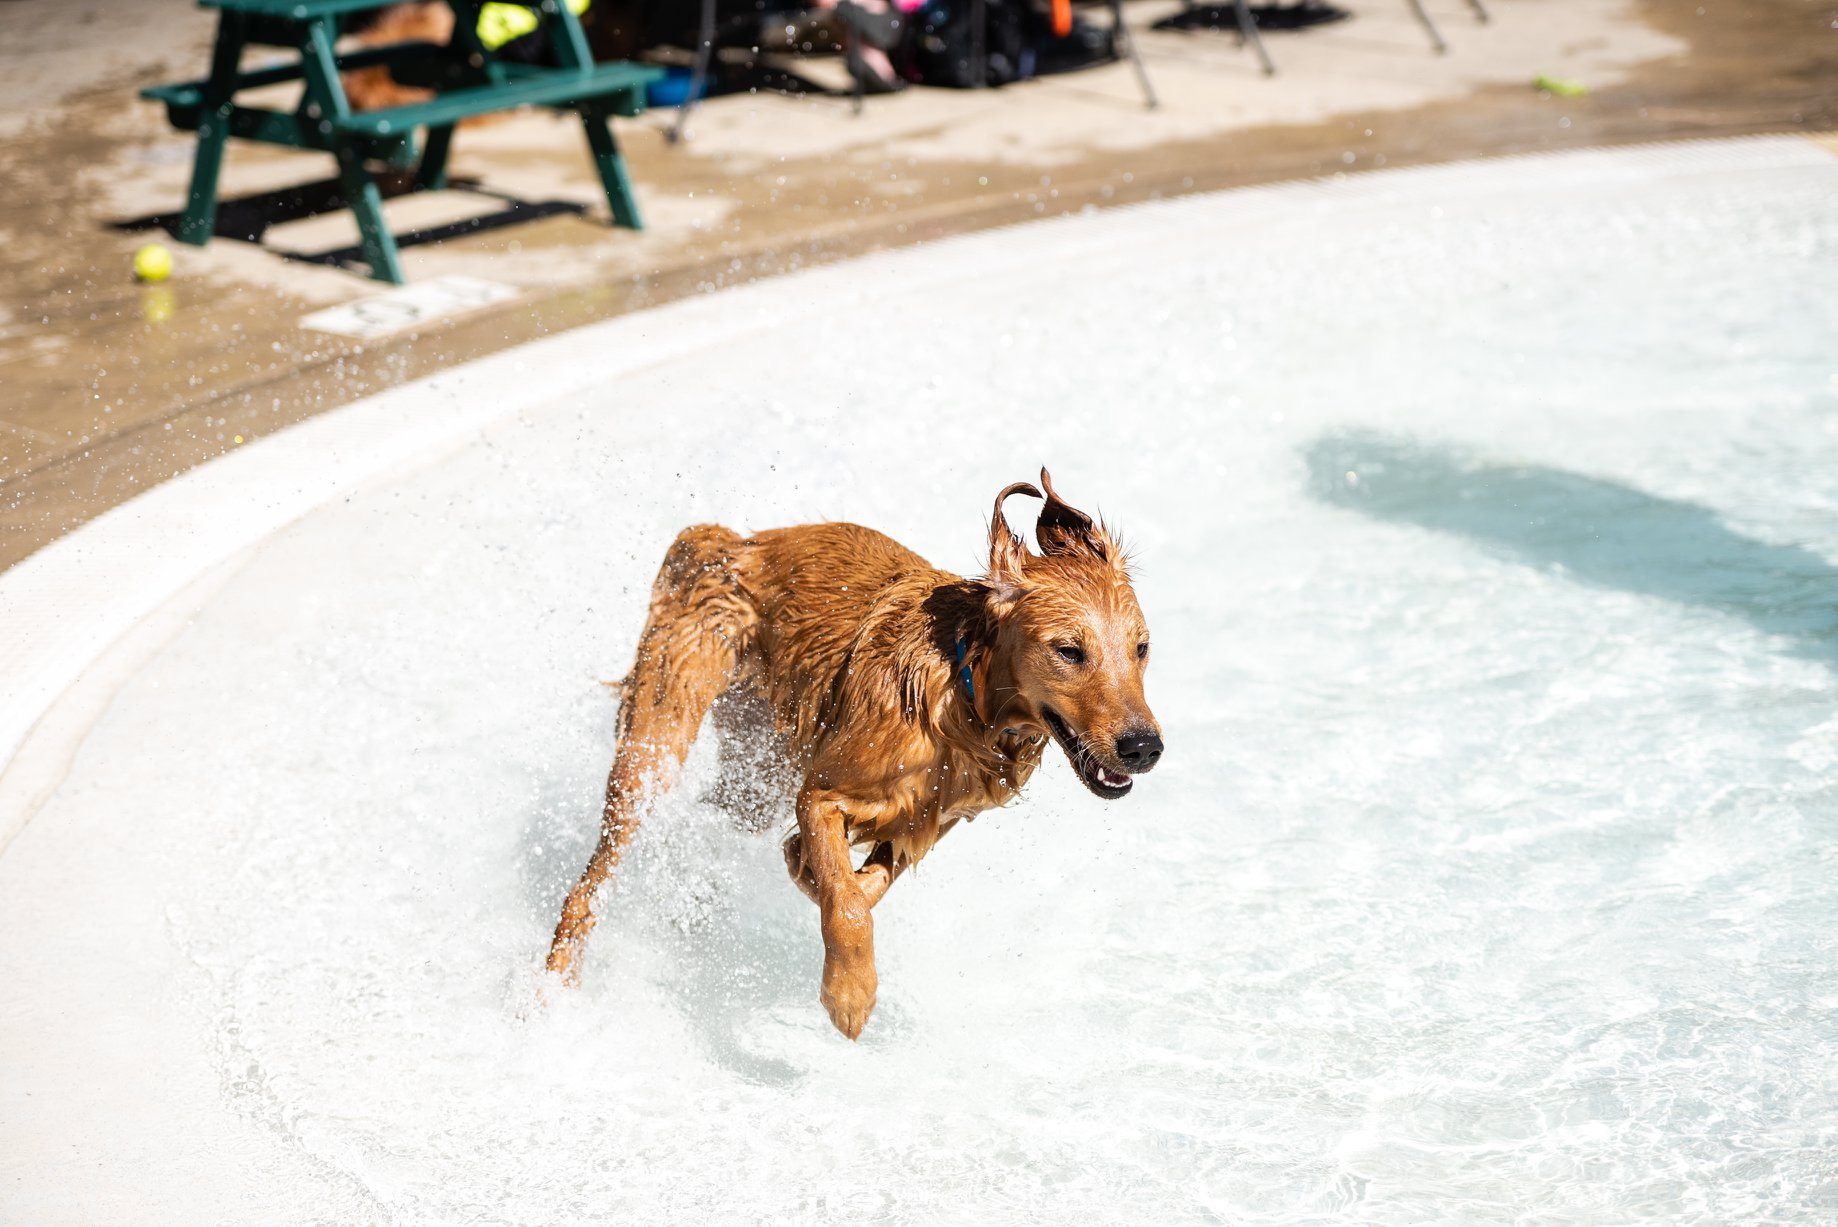 The inspiration for the t-shirt design: this dog in the zero depth pool from last year's event!